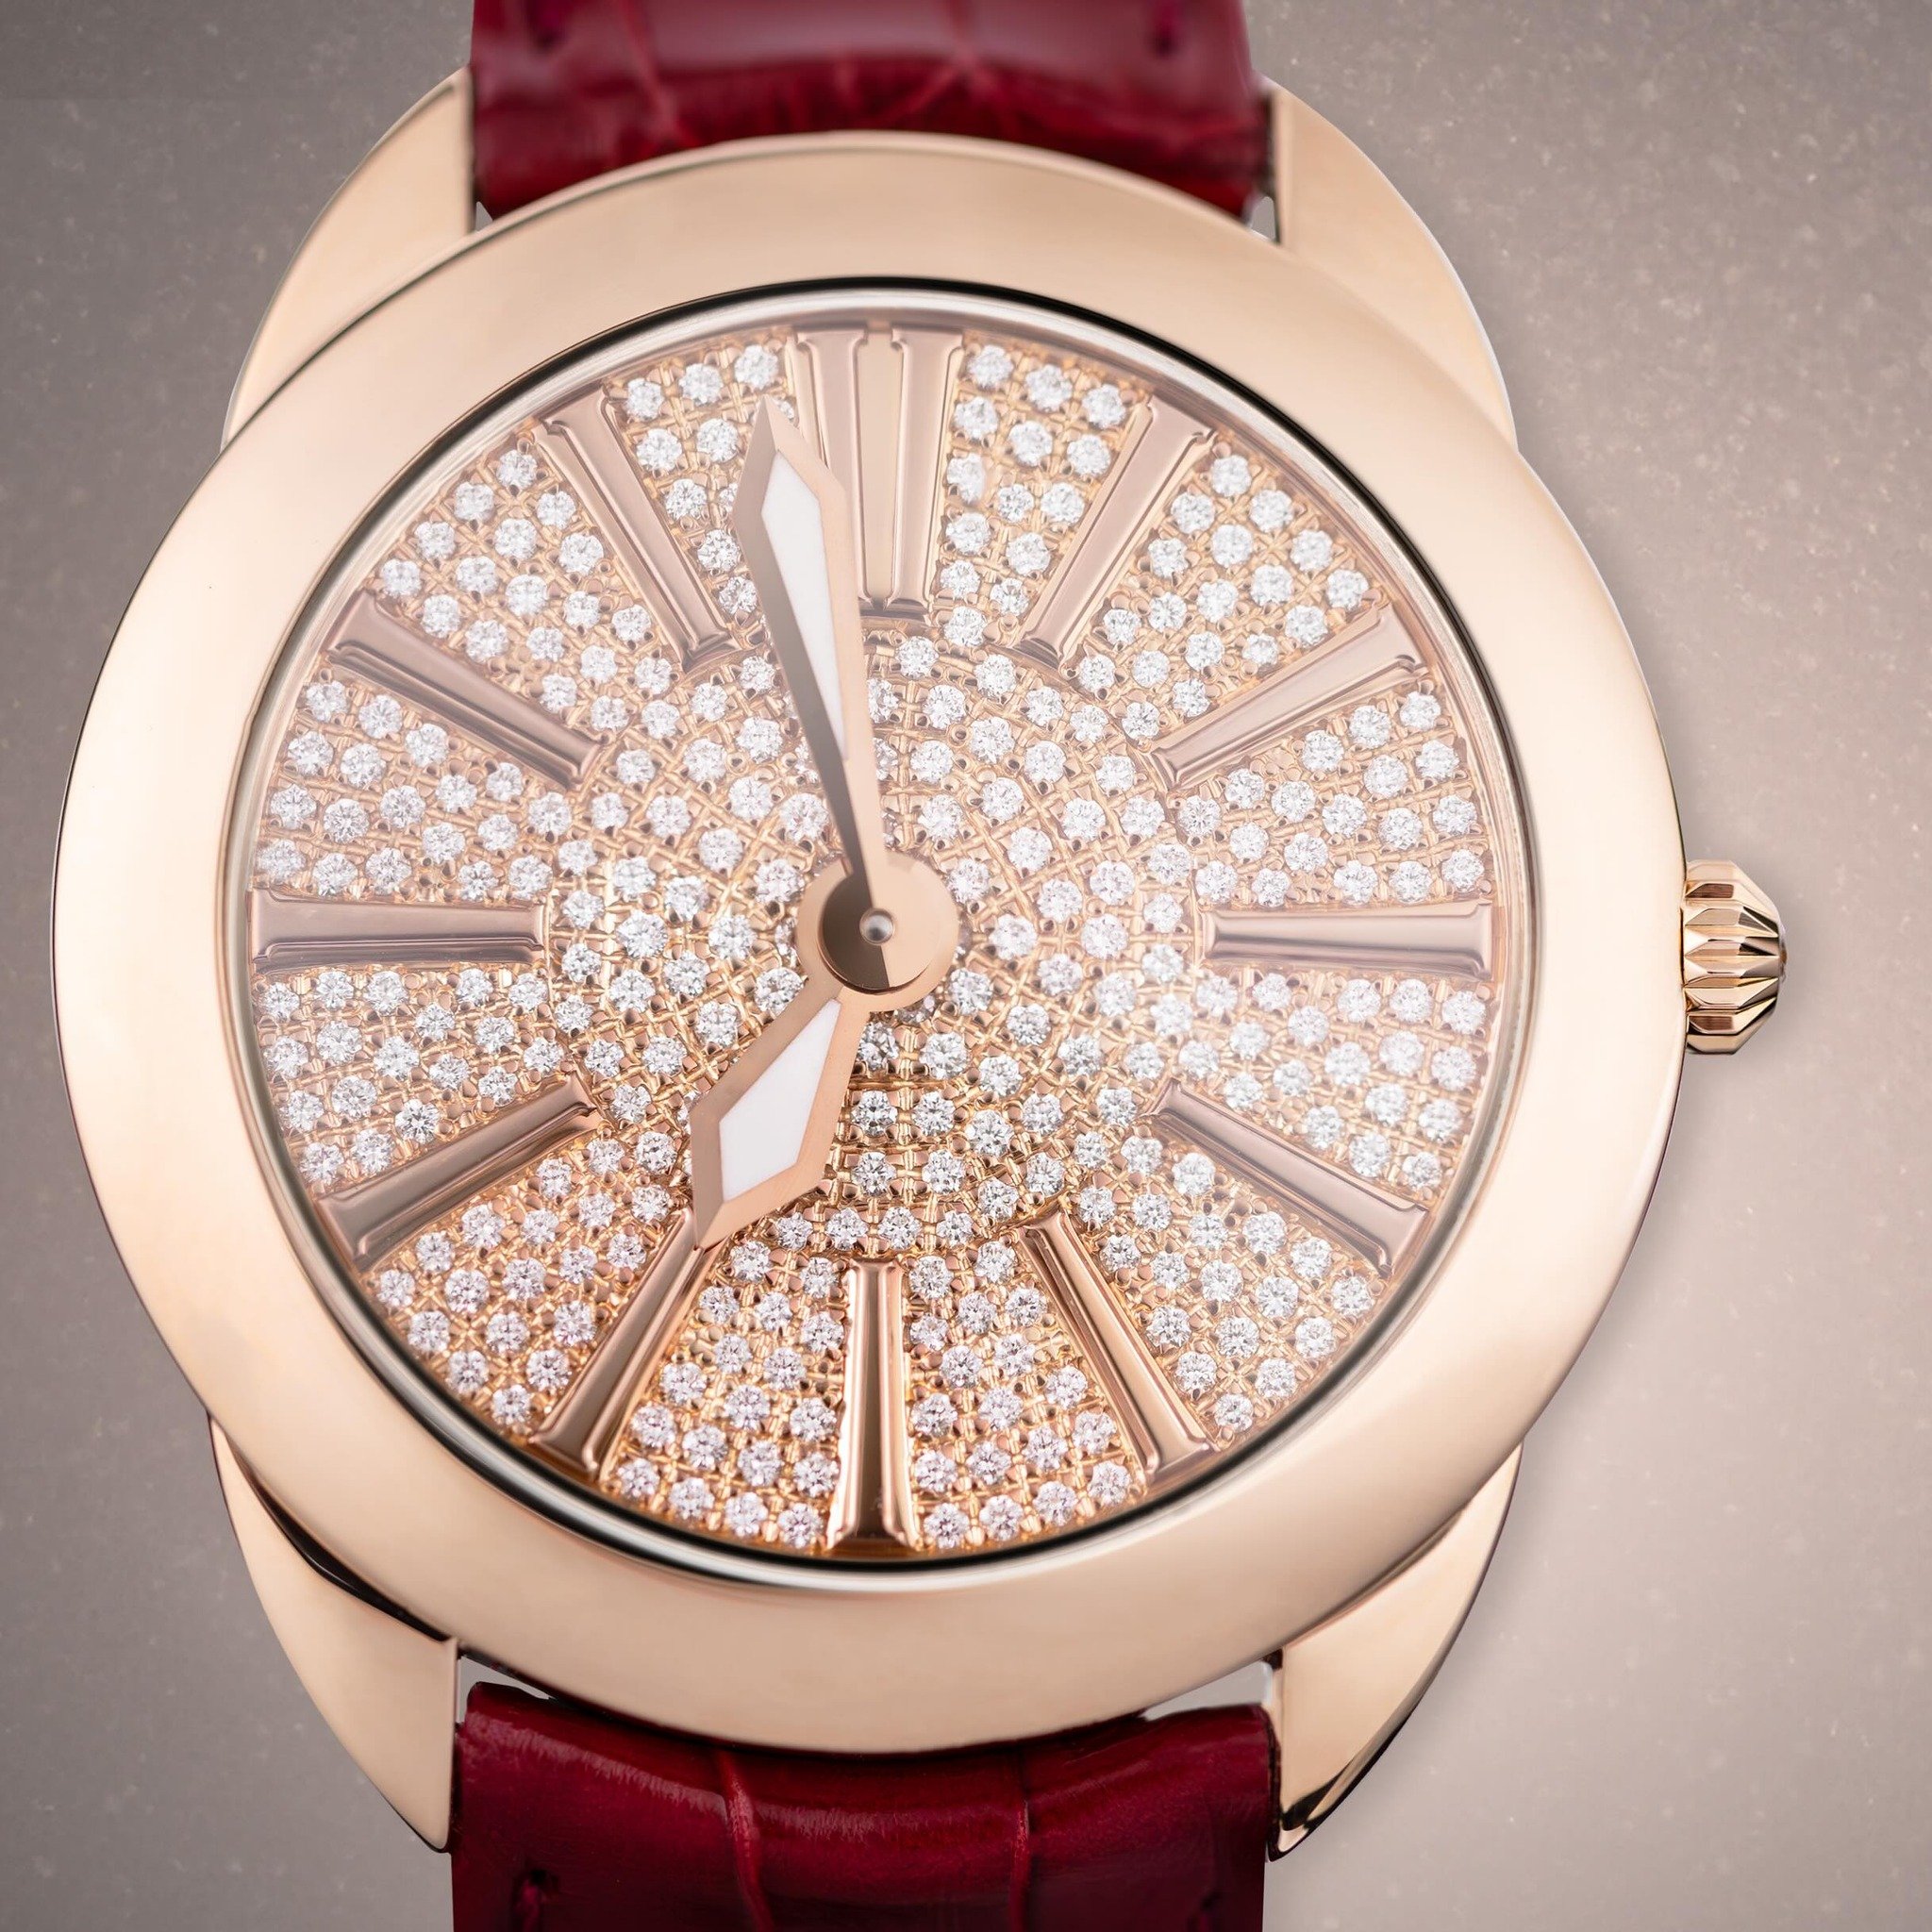 The Piccadilly Pave in a 40mm 18kt rose gold case with its mesmerising diamond set dial